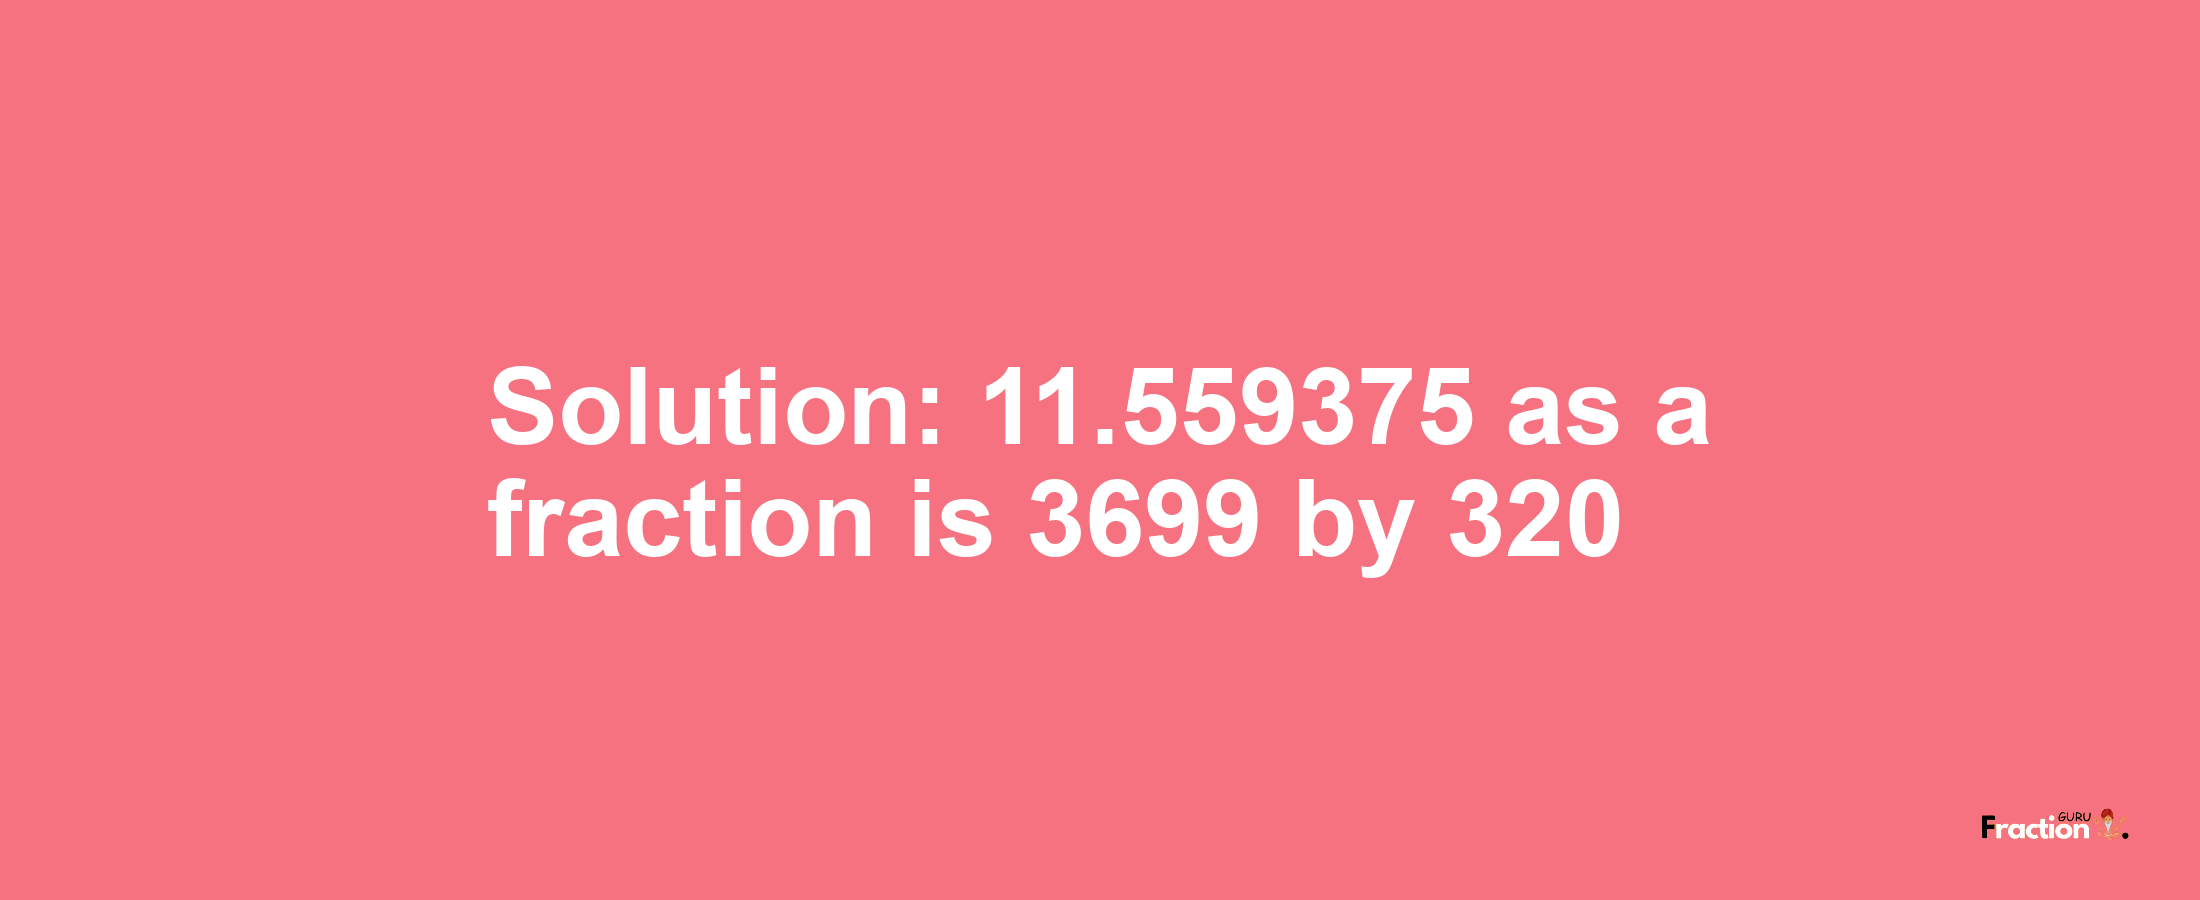 Solution:11.559375 as a fraction is 3699/320